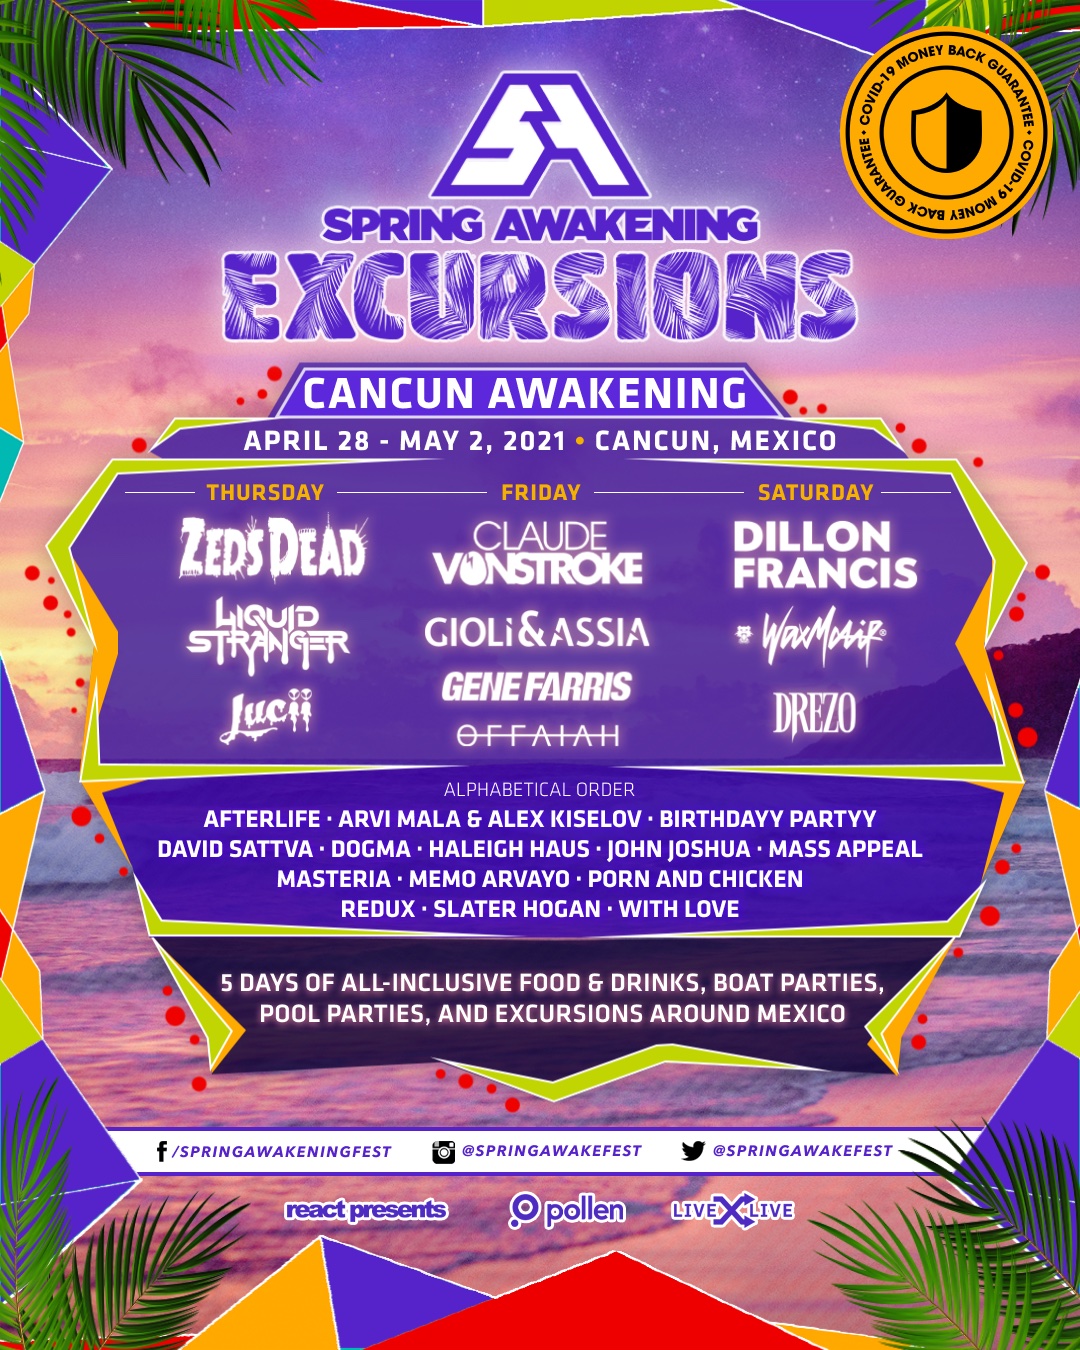 Spring Awakening Cancun 2021 reveals its phasetwo lineup